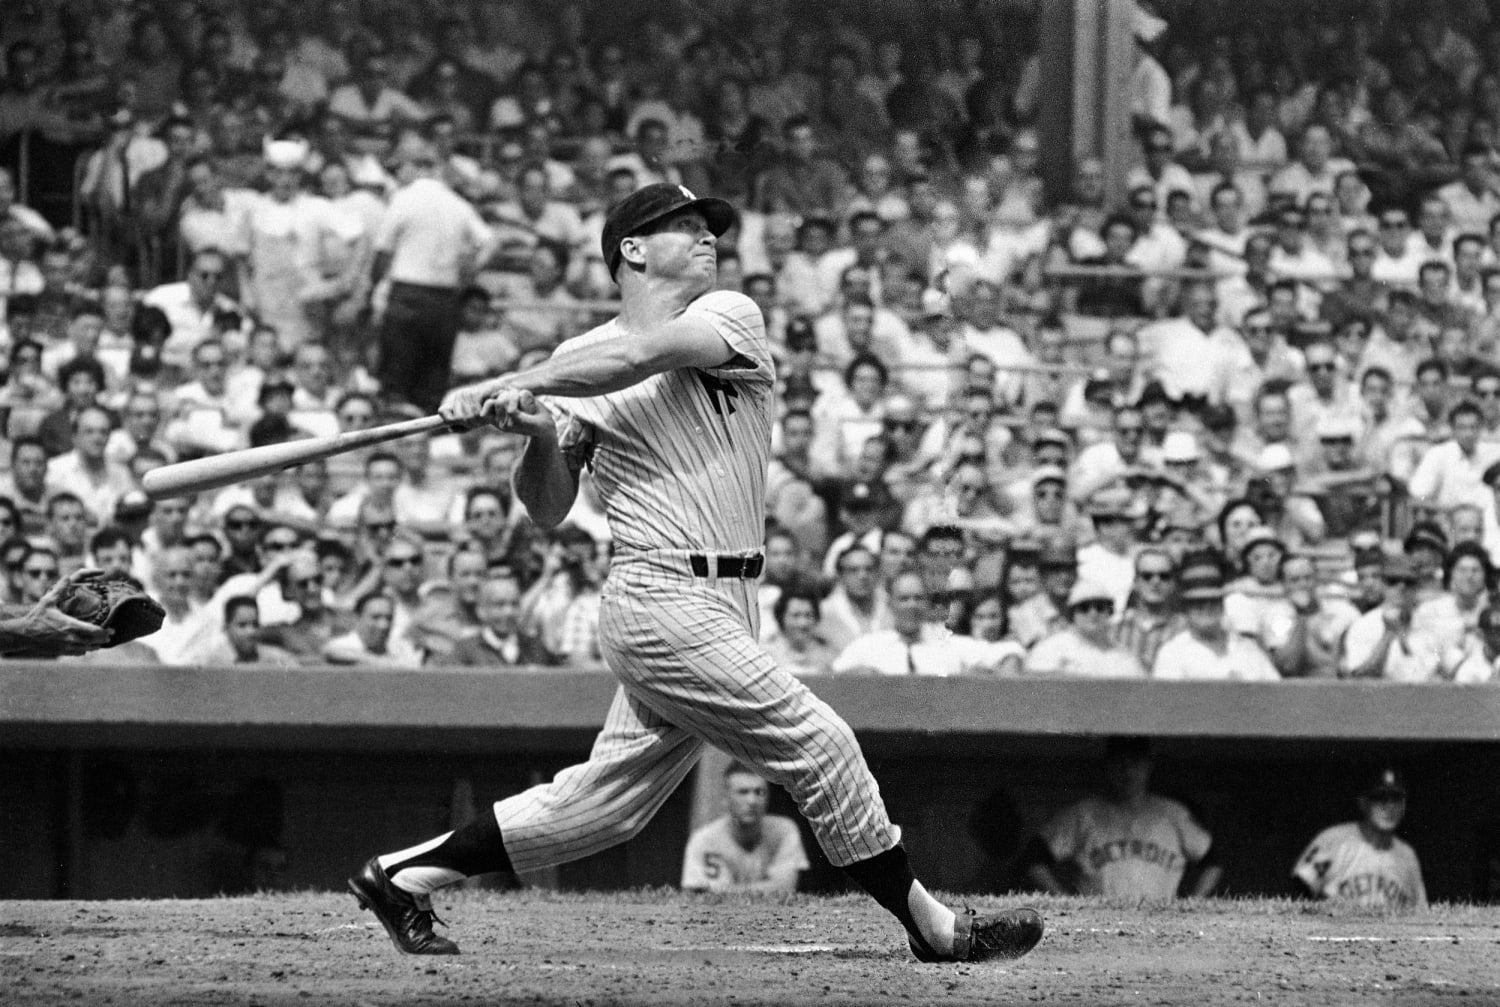 Shares in Mickey Mantle's boyhood home soon on sale for $7 - ESPN